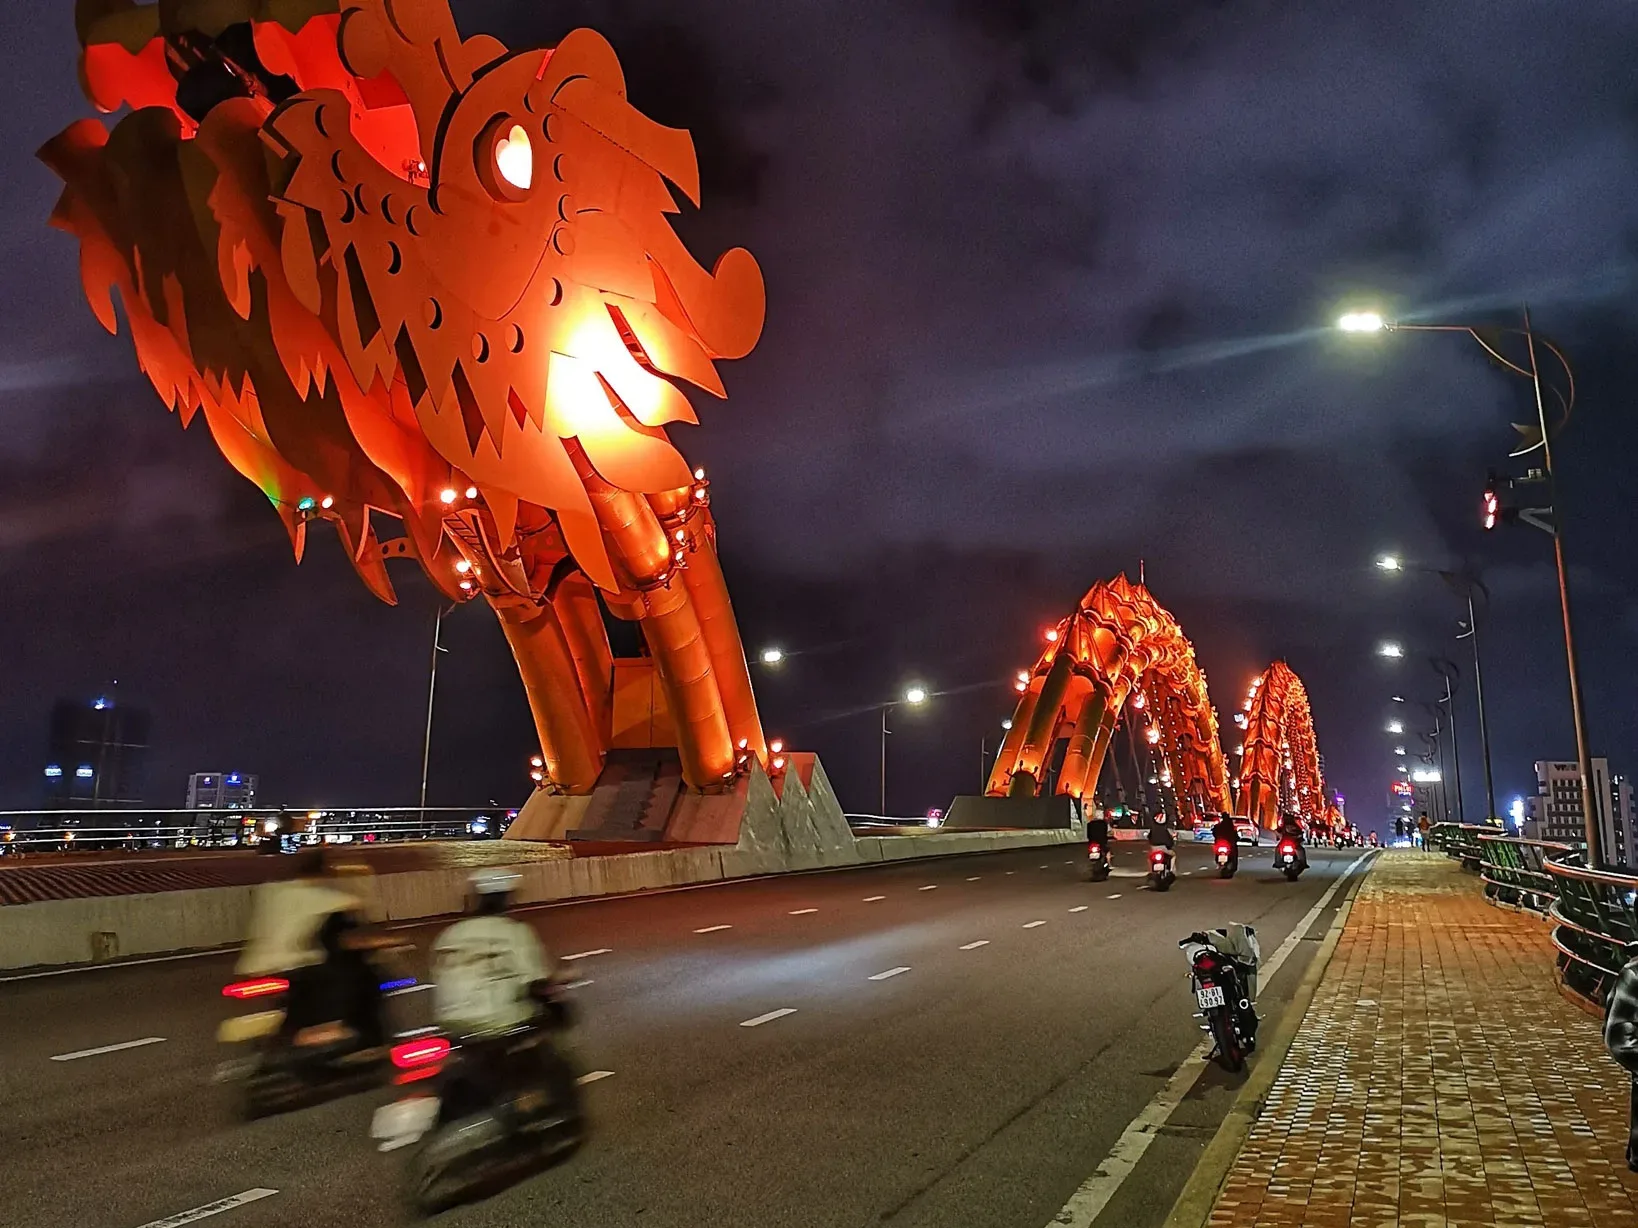 Co-working at Da Nang: Amazing people, crazy traffic and awesome, fire-breathing bridges